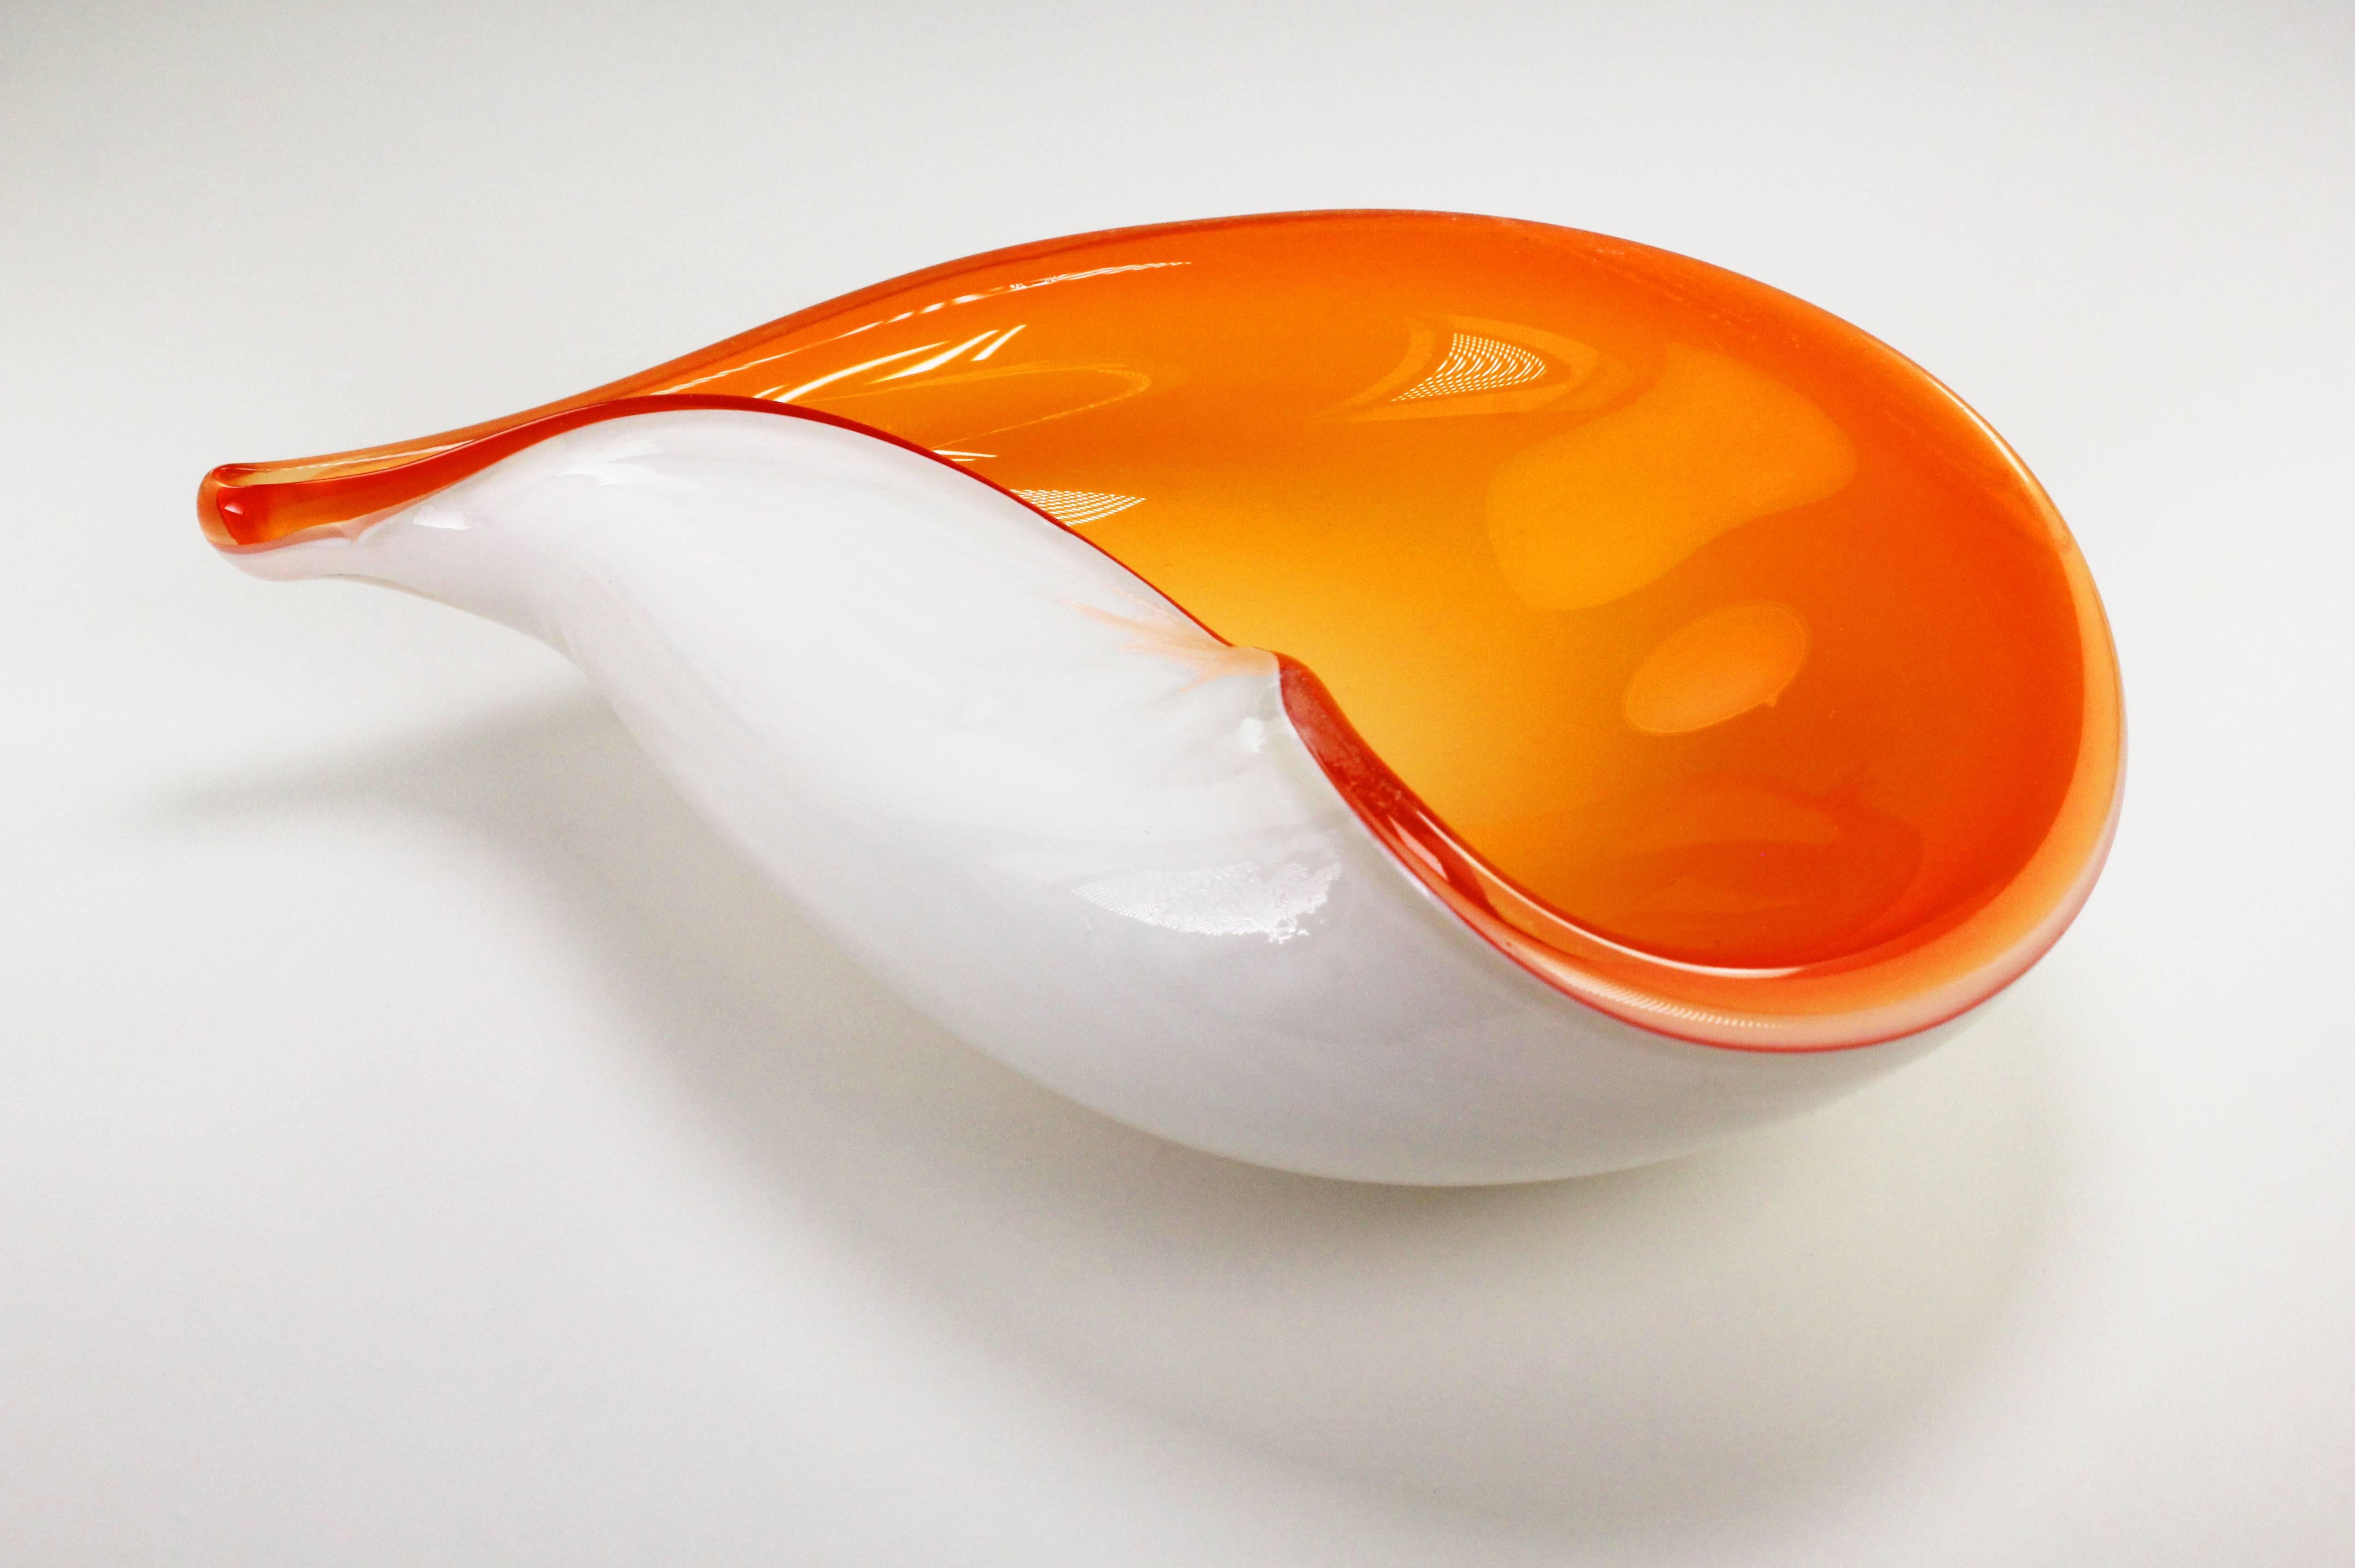 Italian Mid Century Modern smooth sea shell shaped Murano bowl in bright orange glass encased in milky white handblown glass attributed to Alfredo Barbini in the 1950s. Absolutely beautiful condition. Free shipping.